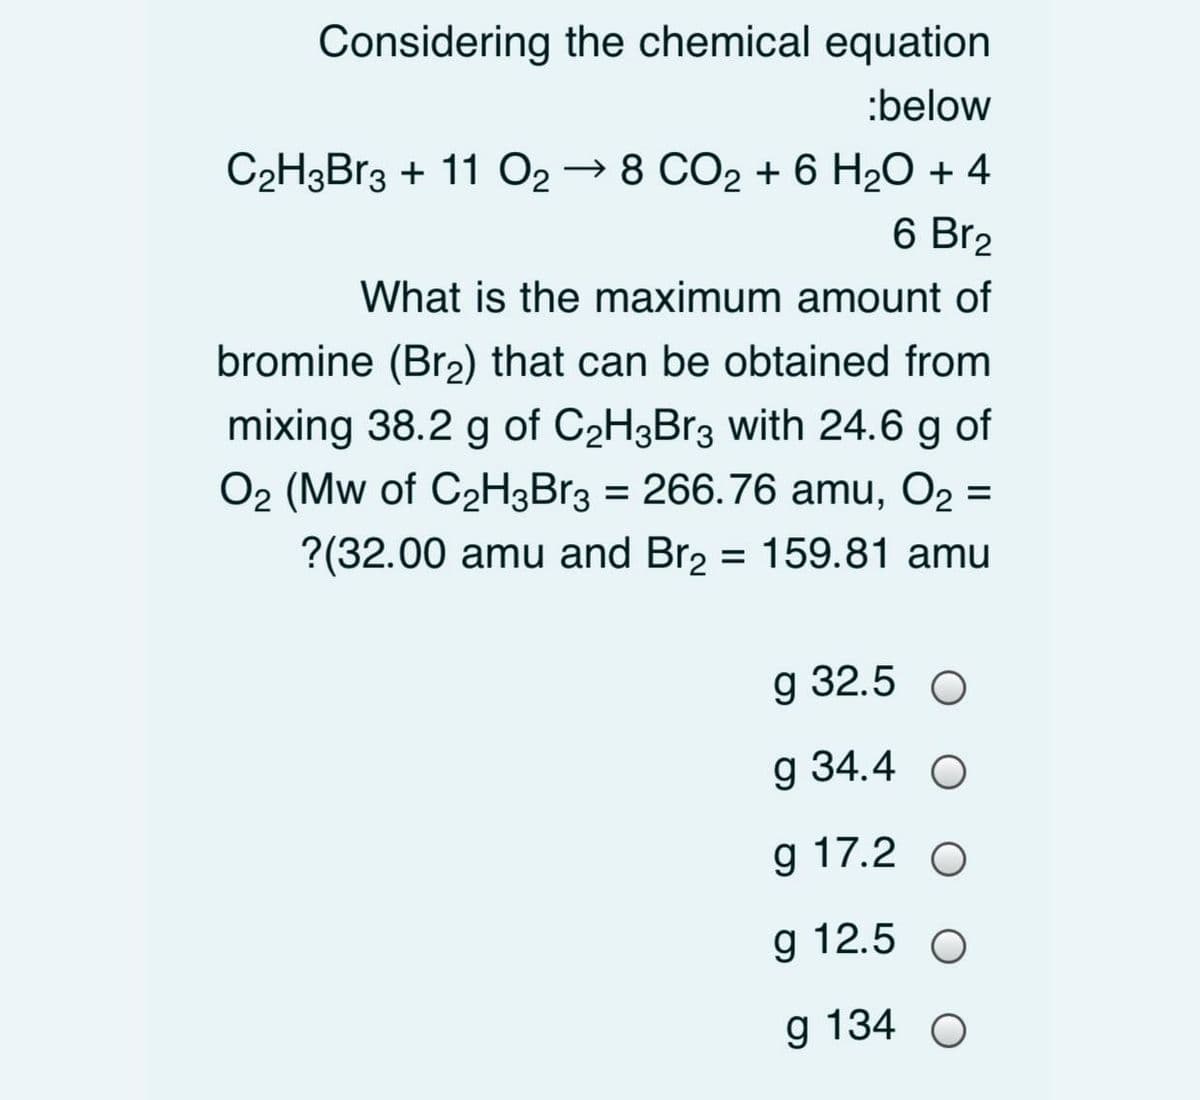 Considering the chemical equation
:below
C2H3B13 + 11 O2 → 8 CO2 + 6 H2O + 4
6 Br2
What is the maximum amount of
bromine (Br2) that can be obtained from
mixing 38.2 g of C2H3B13 with 24.6 g of
O2 (Mw of C2H3Br3 = 266.76 amu, O2 =
?(32.00 amu and Br2 = 159.81 amu
g 32.5 О
g 34.4 O
g 17.2 O
g 12.5 O
g 134
